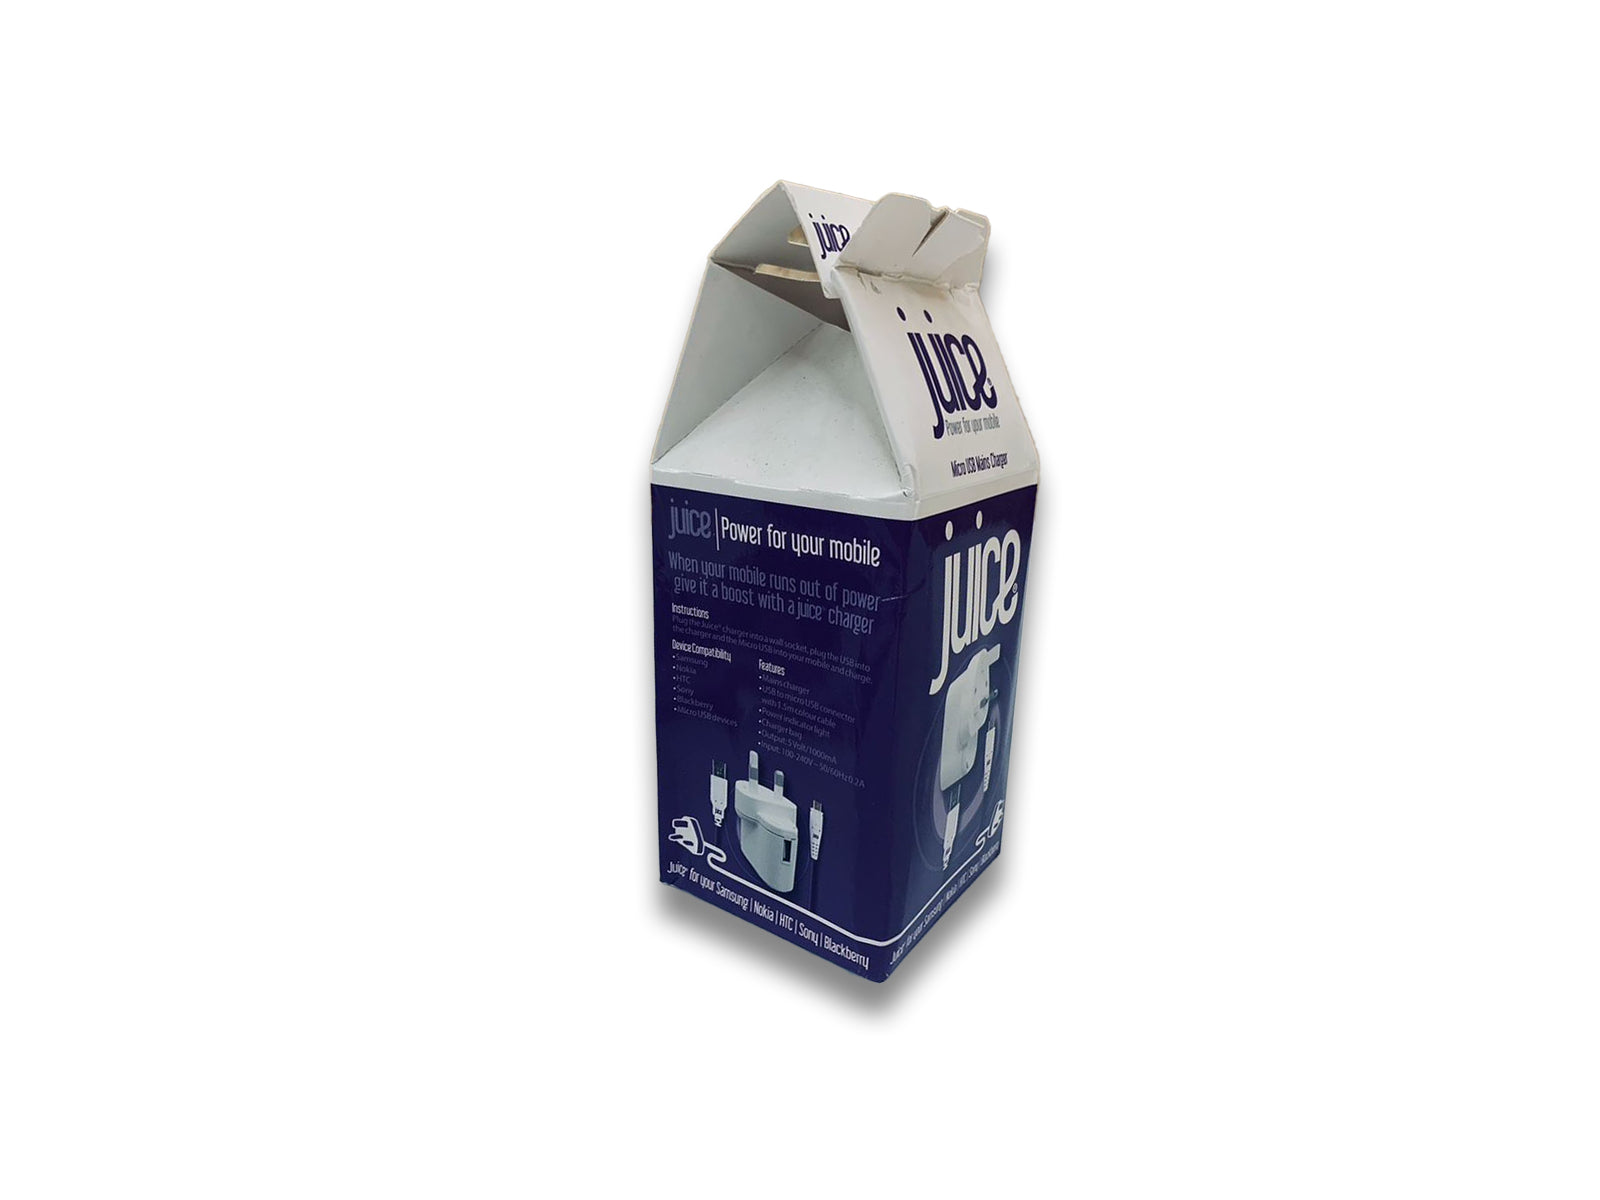 Image shows side view of juice box on white background